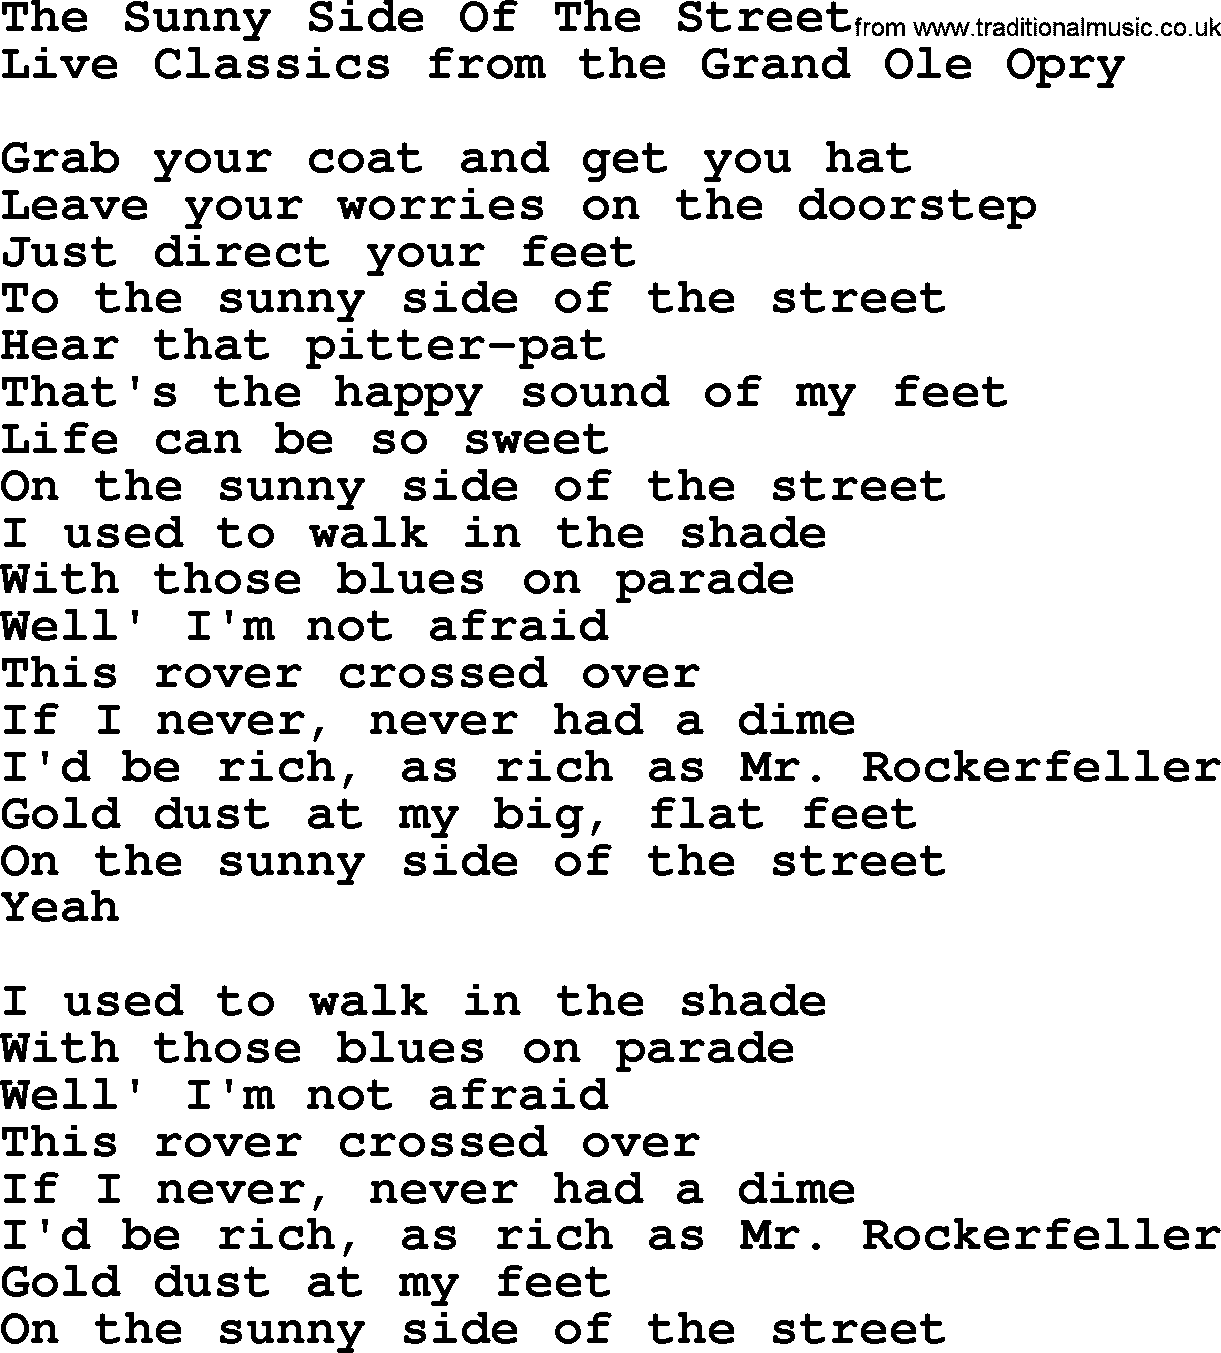 Marty Robbins song: The Sunny Side Of The Street, lyrics